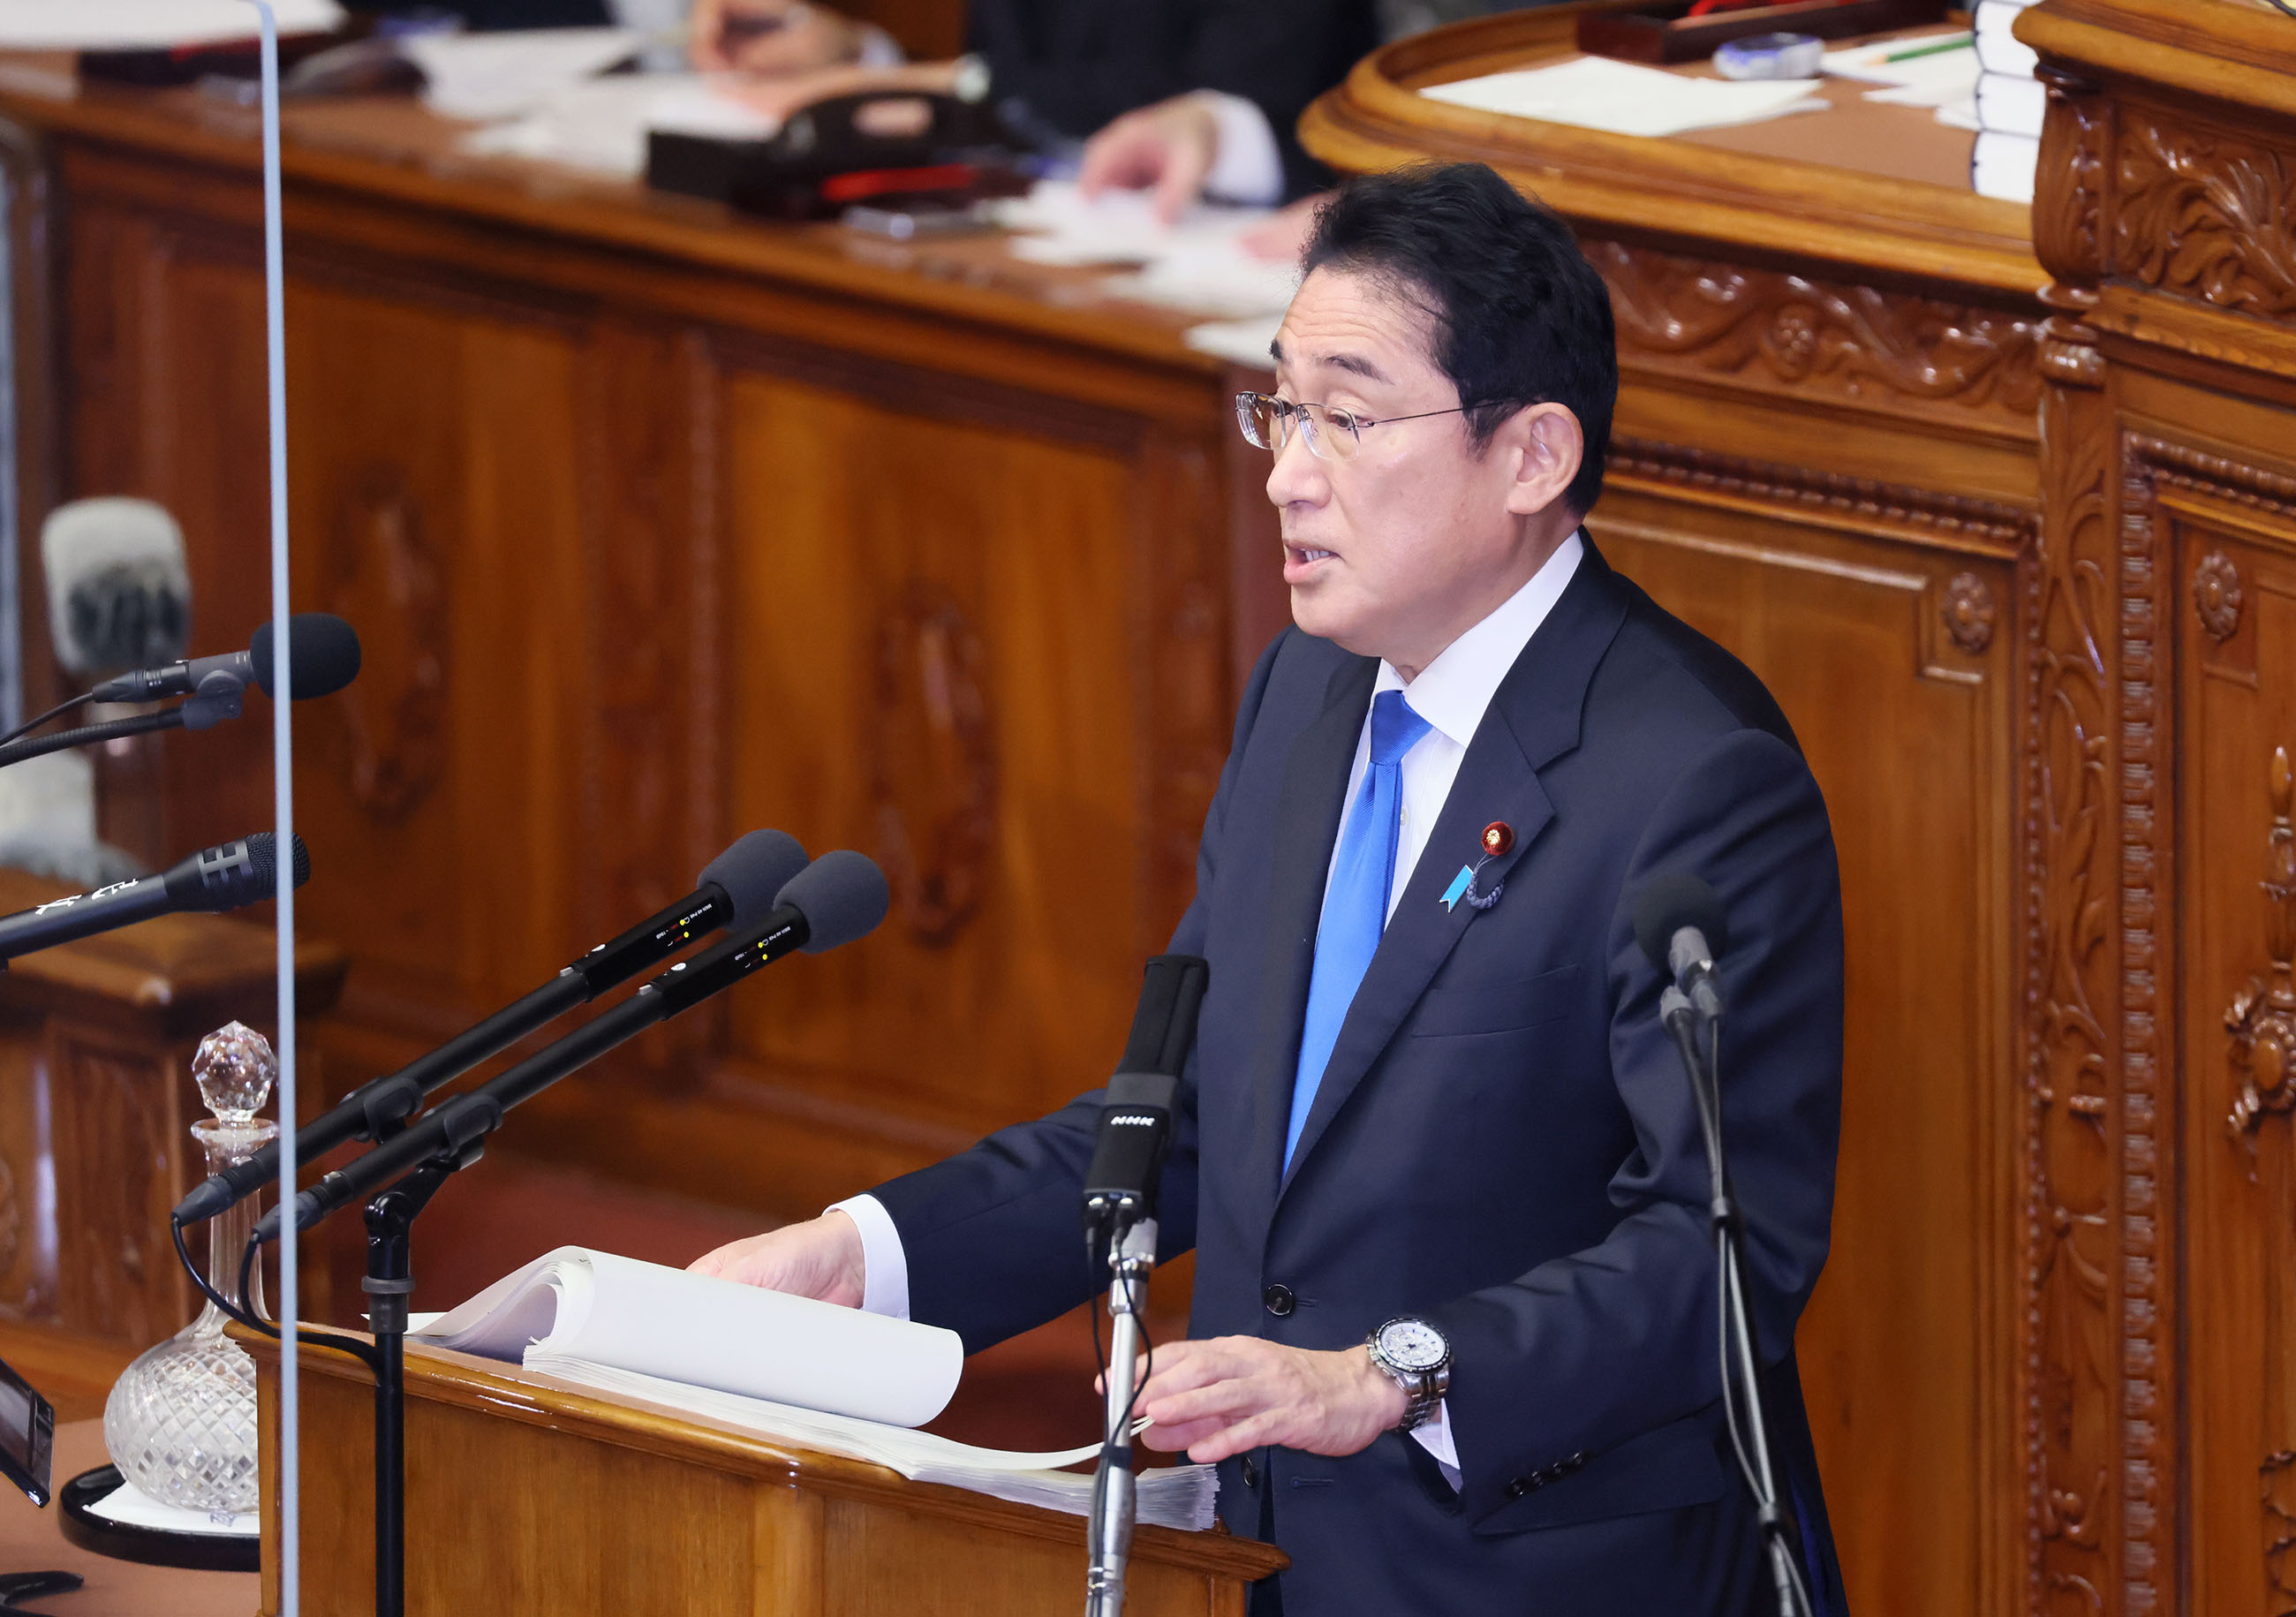 Prime Minister Kishida delivering a policy speech during the plenary session of the House of Representatives (1)